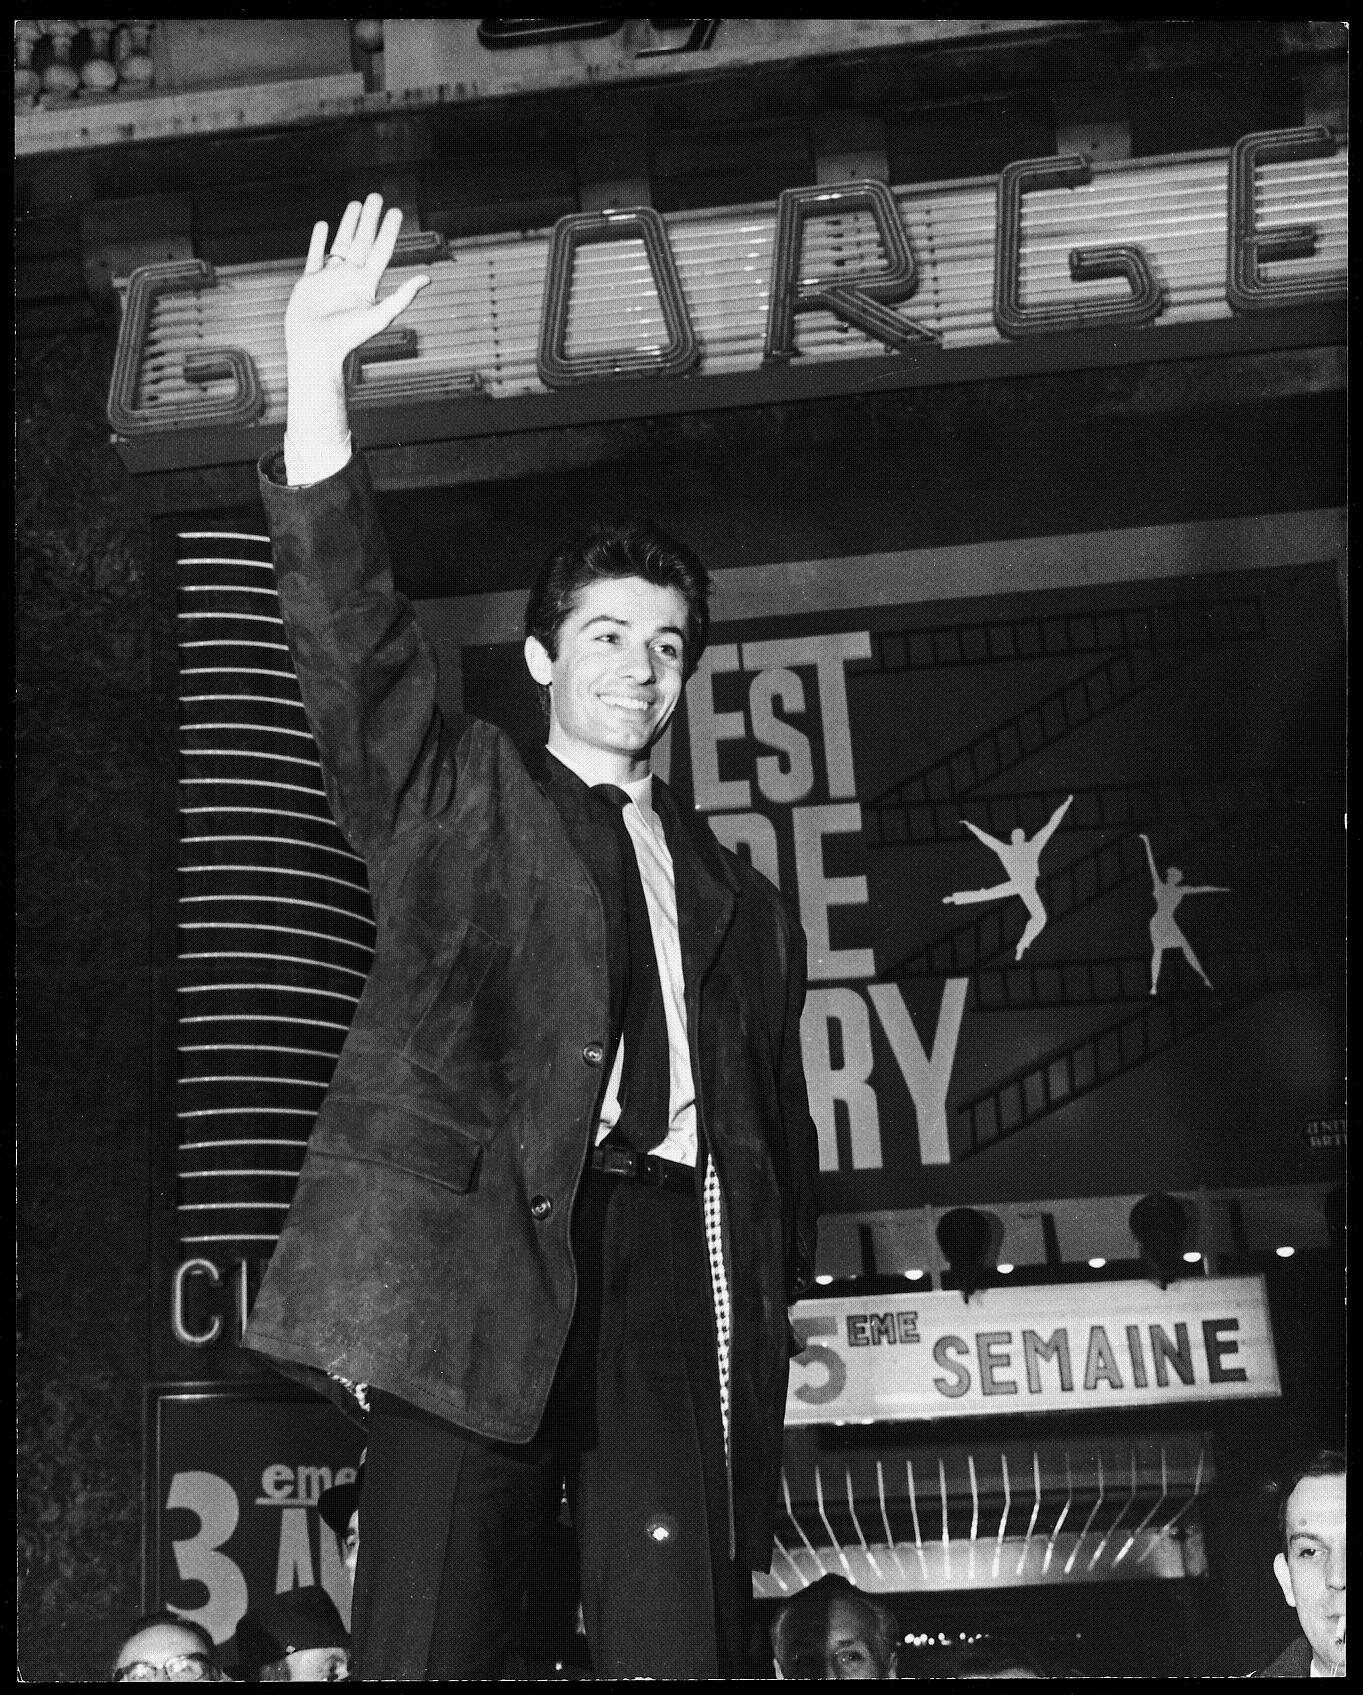 WWS Premiere : George Chakiris' arrival was greeted with cheers